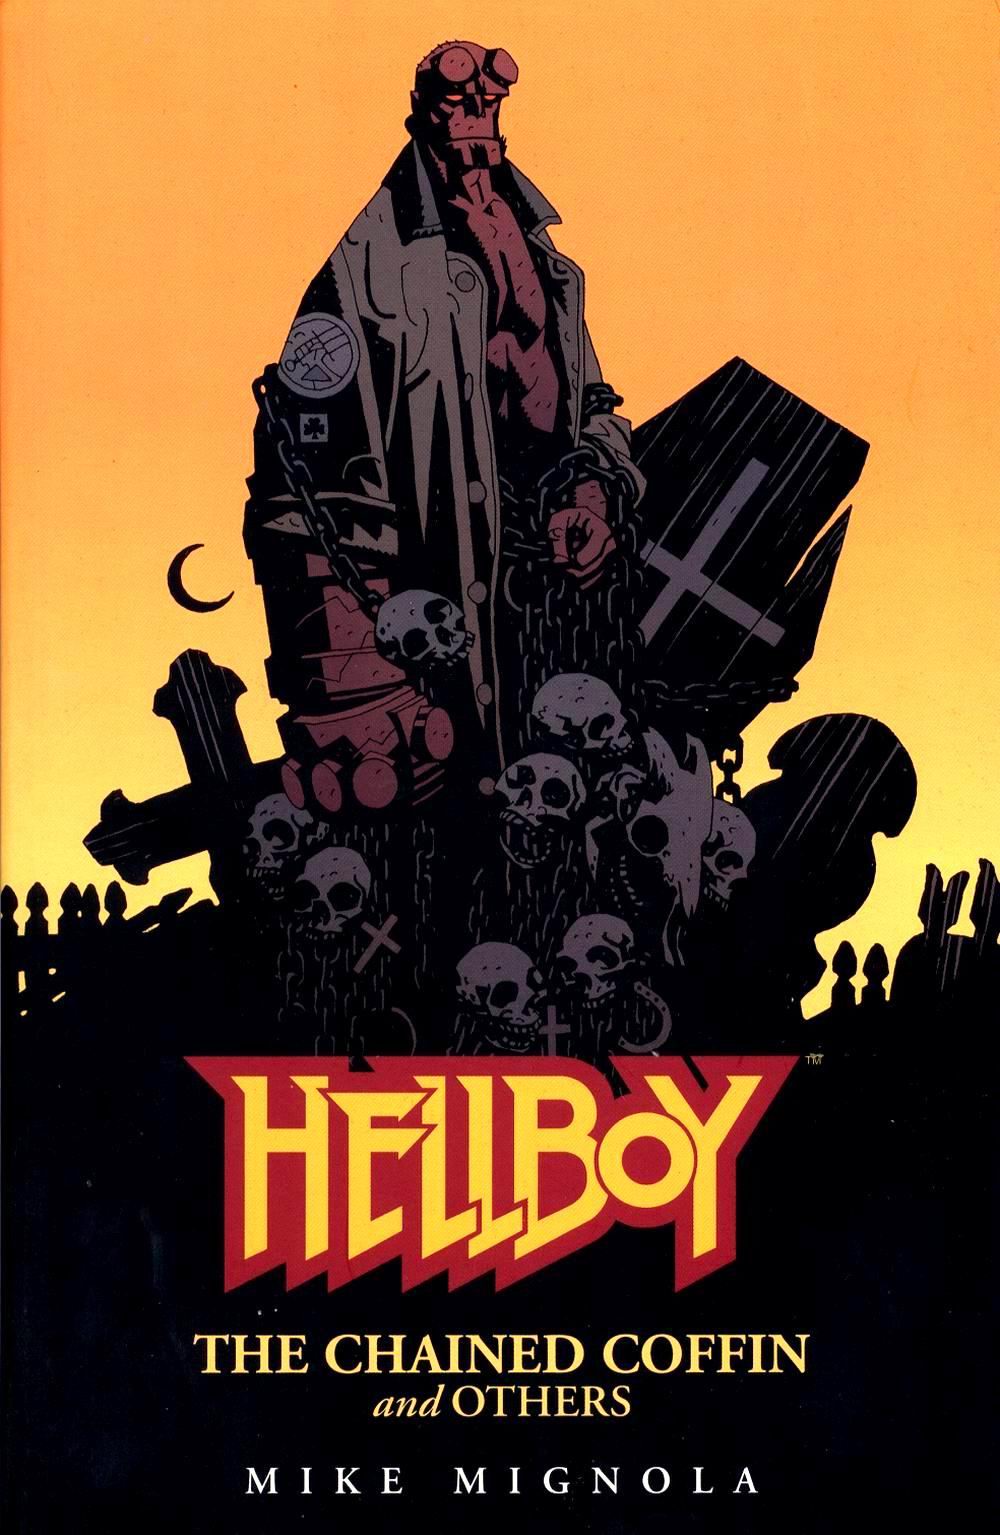 Read online Hellboy: The Chained Coffin and Others comic -  Issue # Full - 1